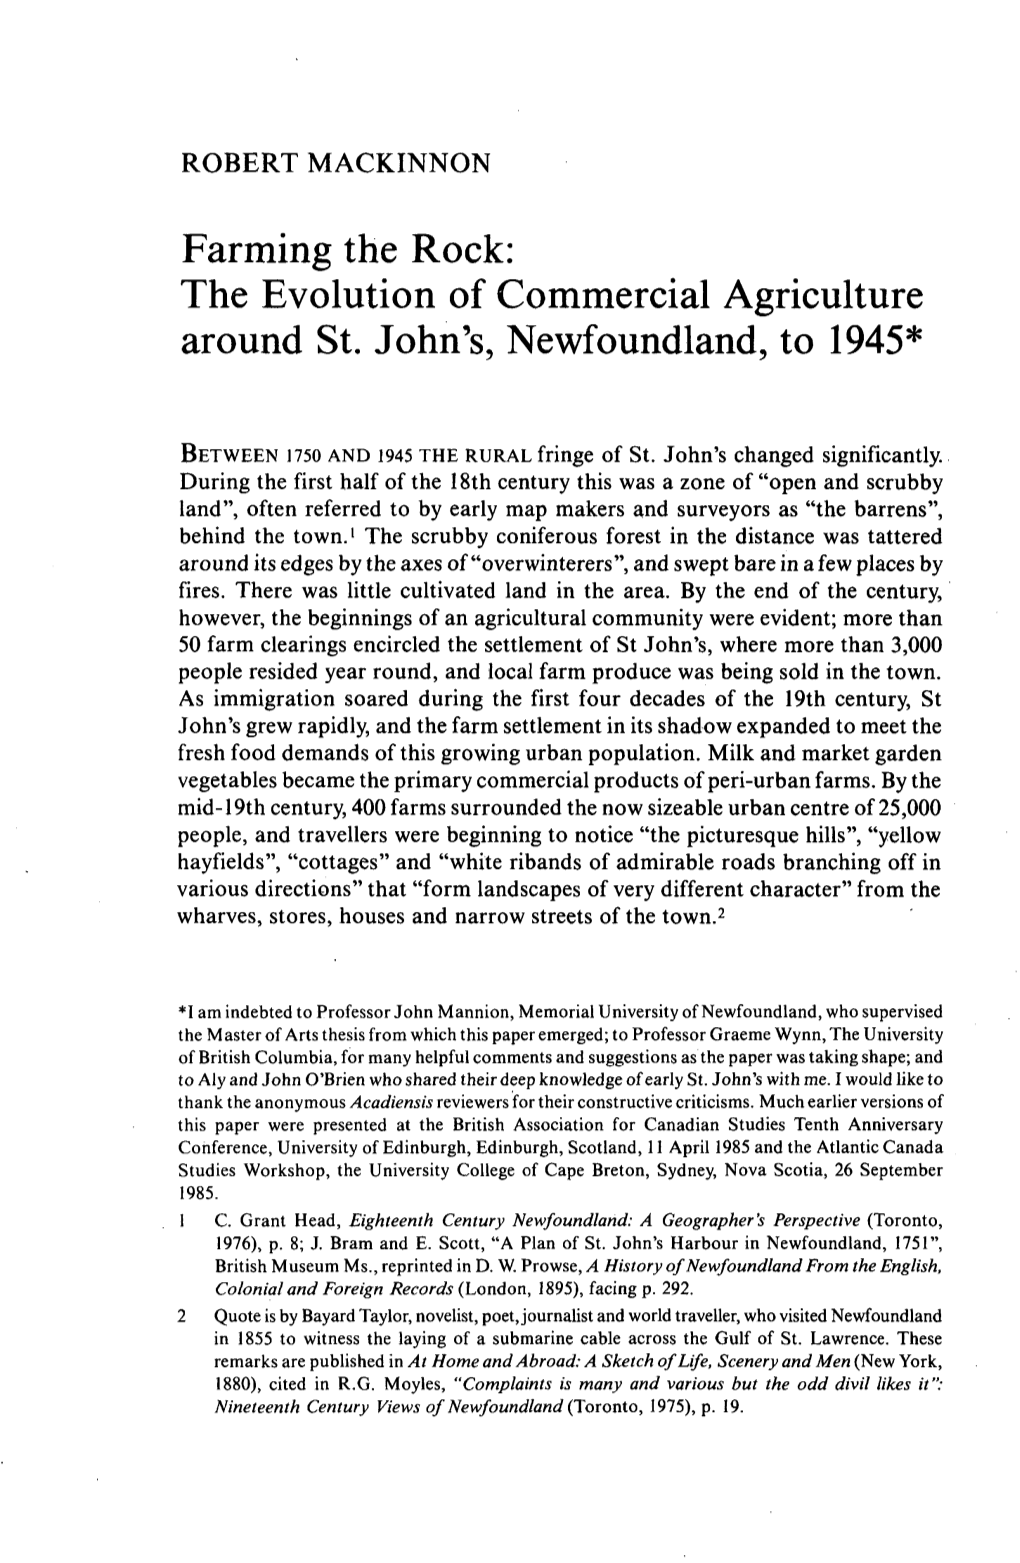 Farming the Rock: the Evolution of Commercial Agriculture Around St